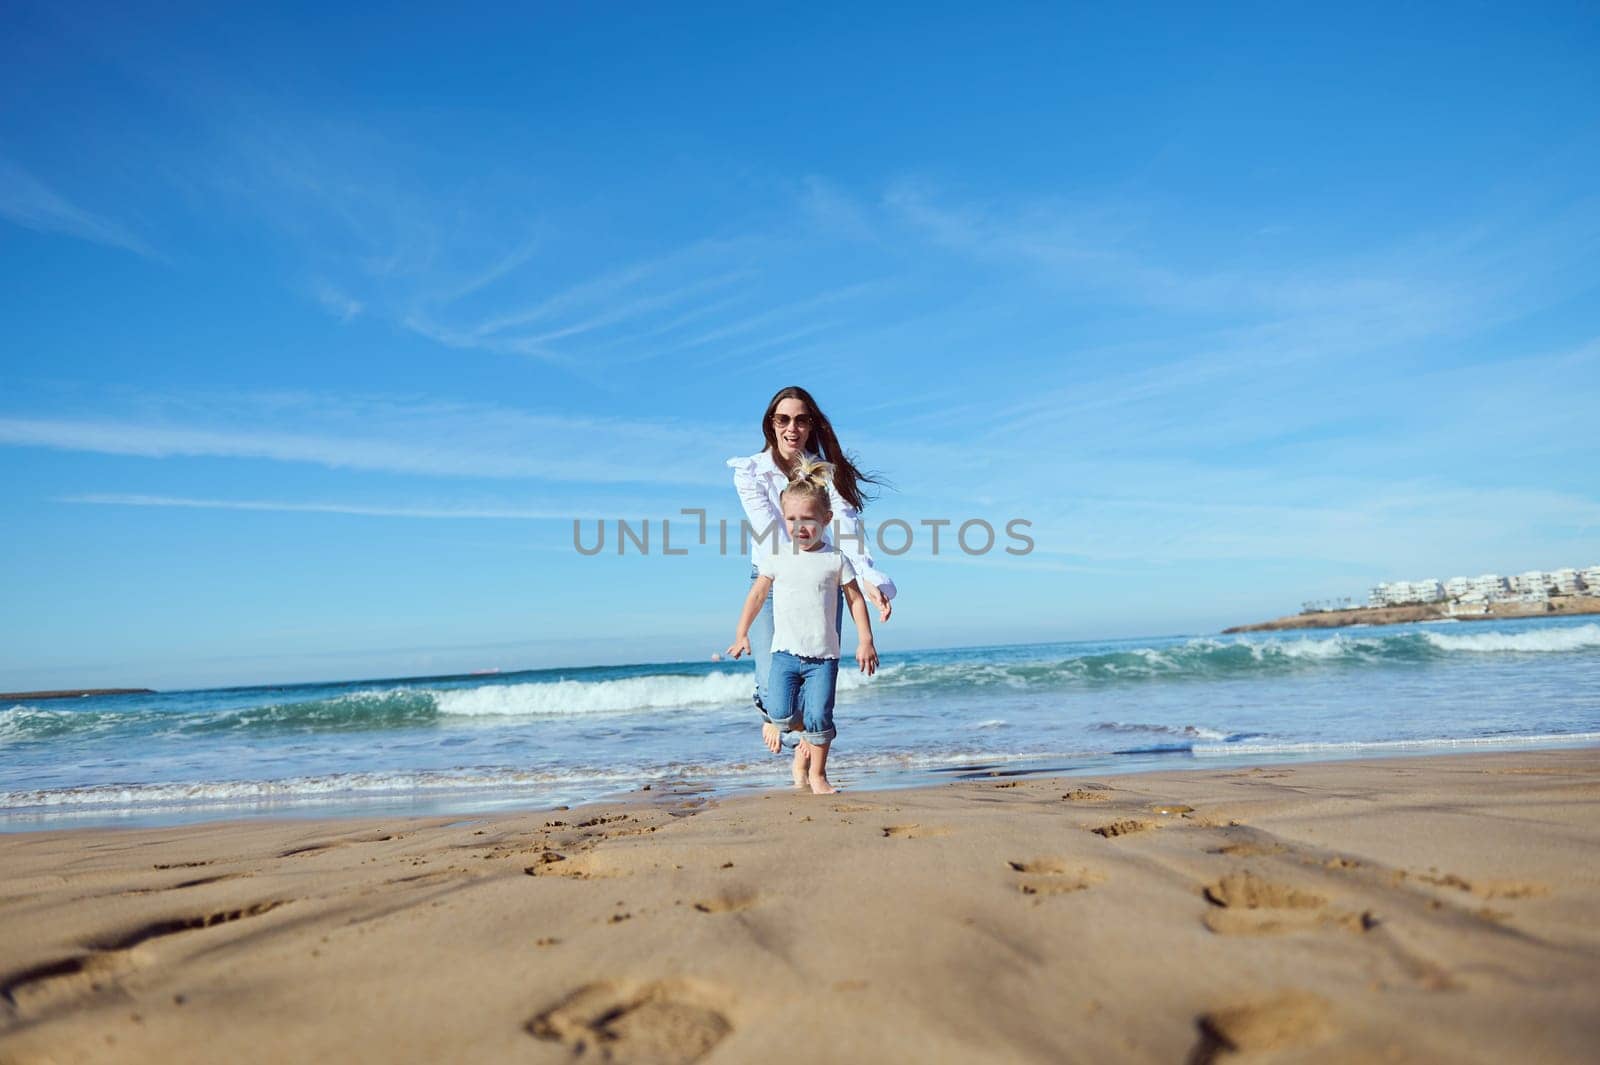 Cheerful happy mom catches her daughter while running barefoot, playing together on beach, leaving footsteps on wet sand by artgf